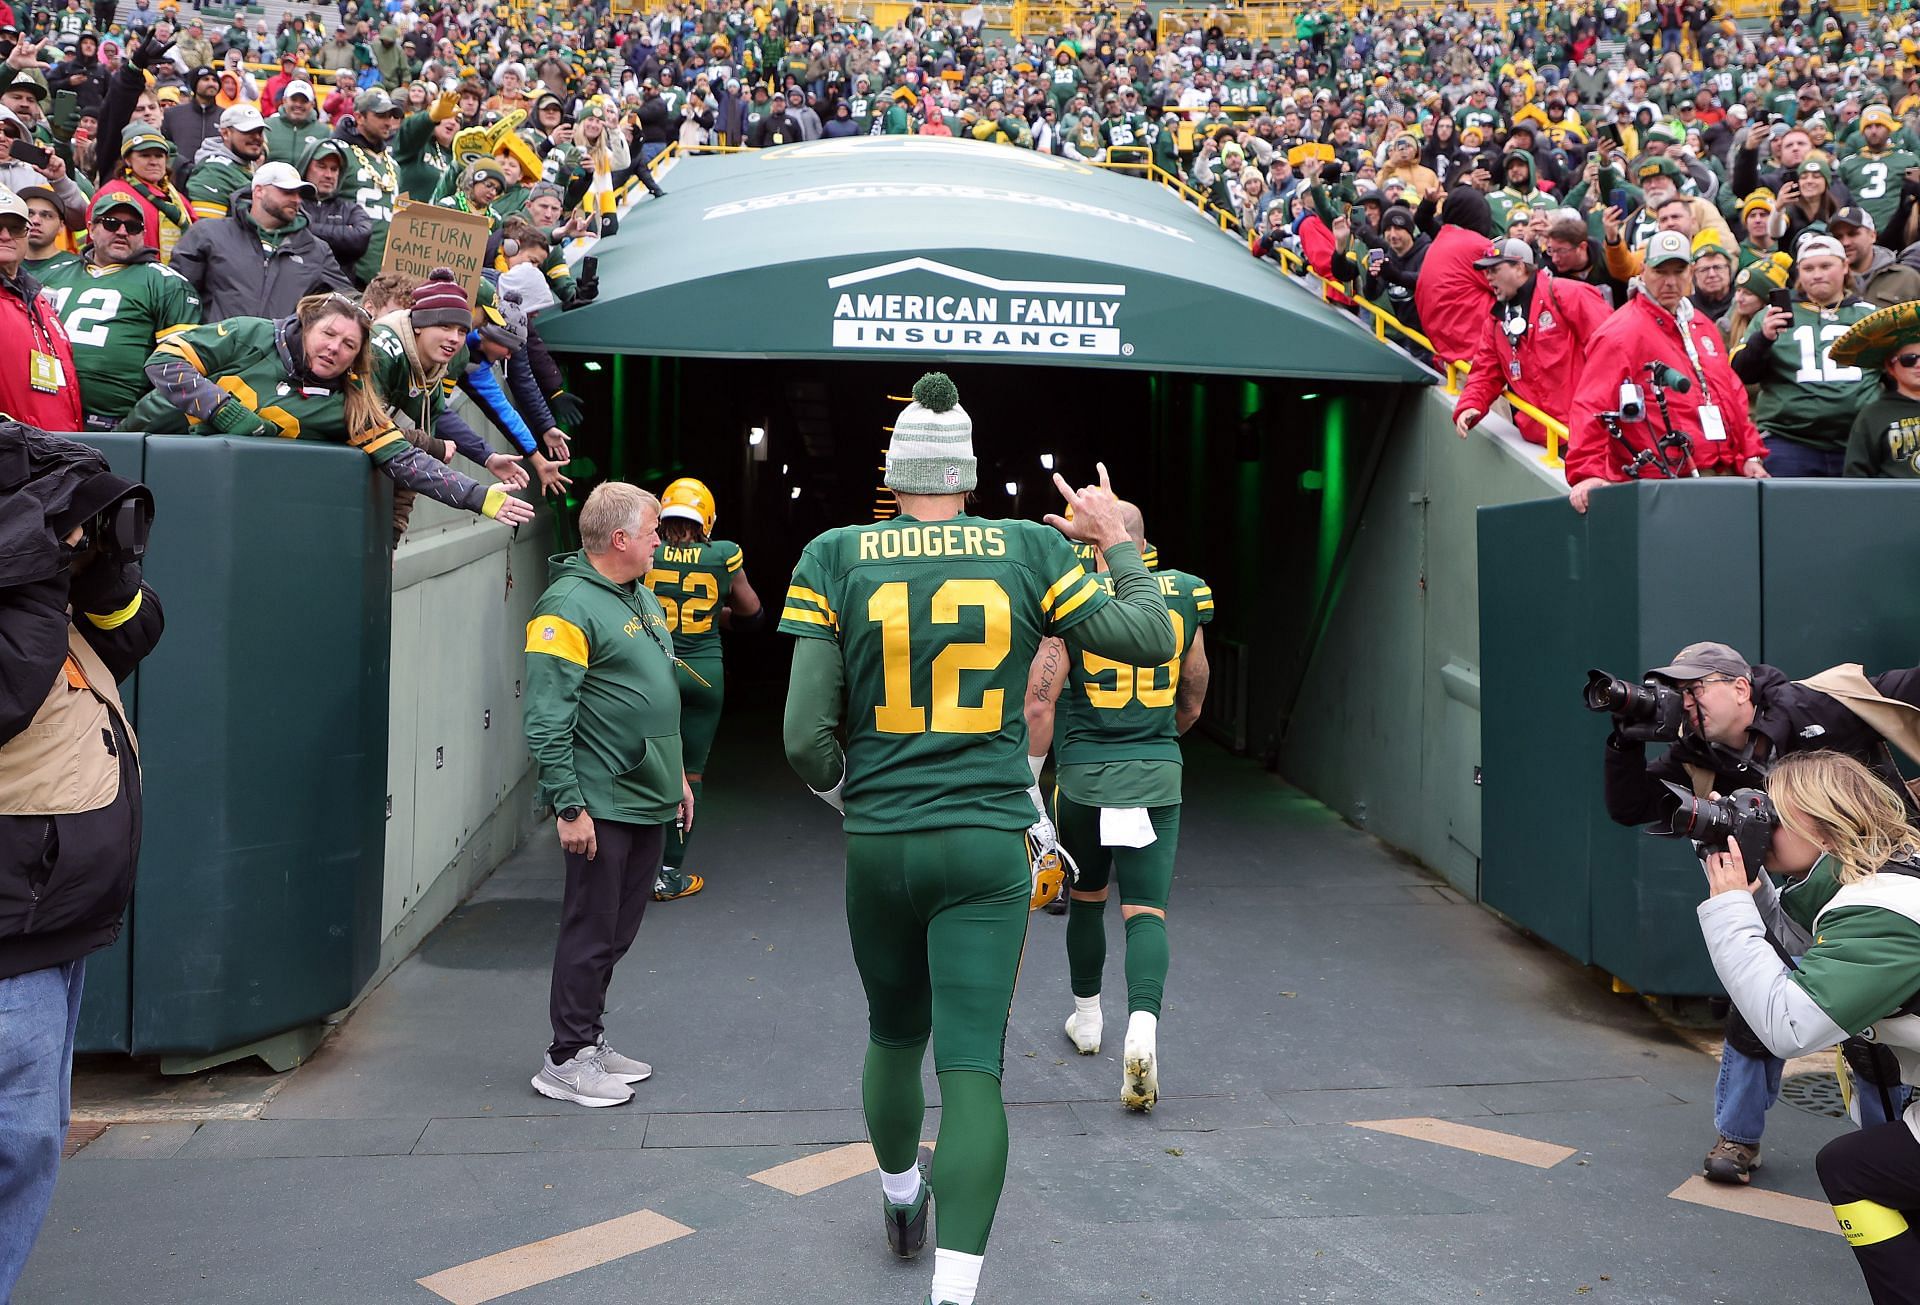 Aaron Rodgers will likely be a Jet soon